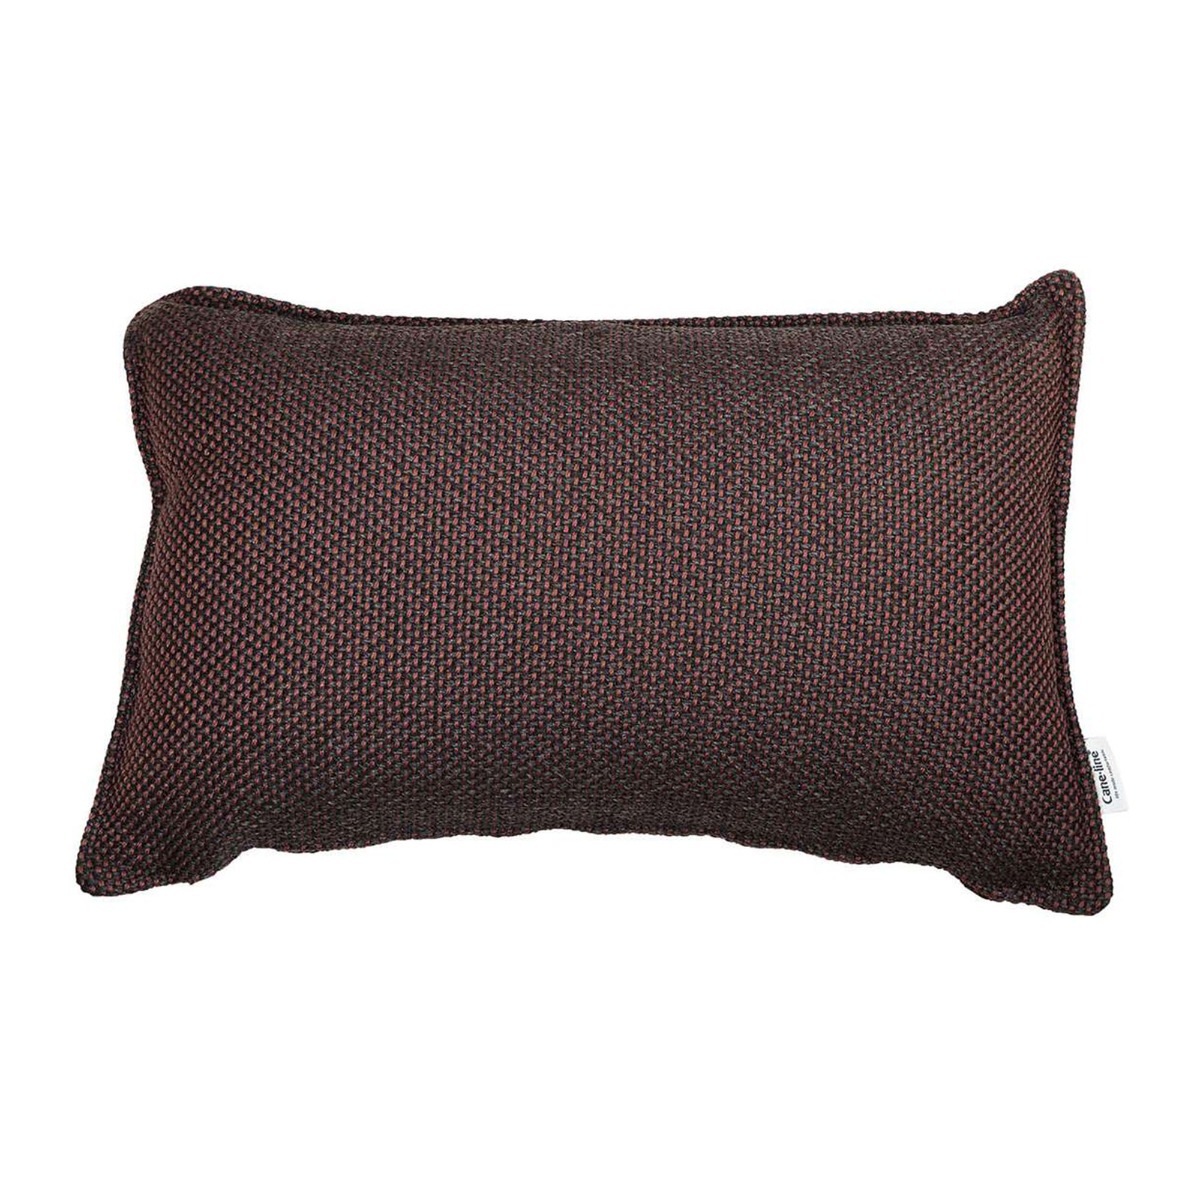 Cane Line Focus Scatter Cushion 52x32x12cm, Square, Red Polypropylene | Barker & Stonehouse